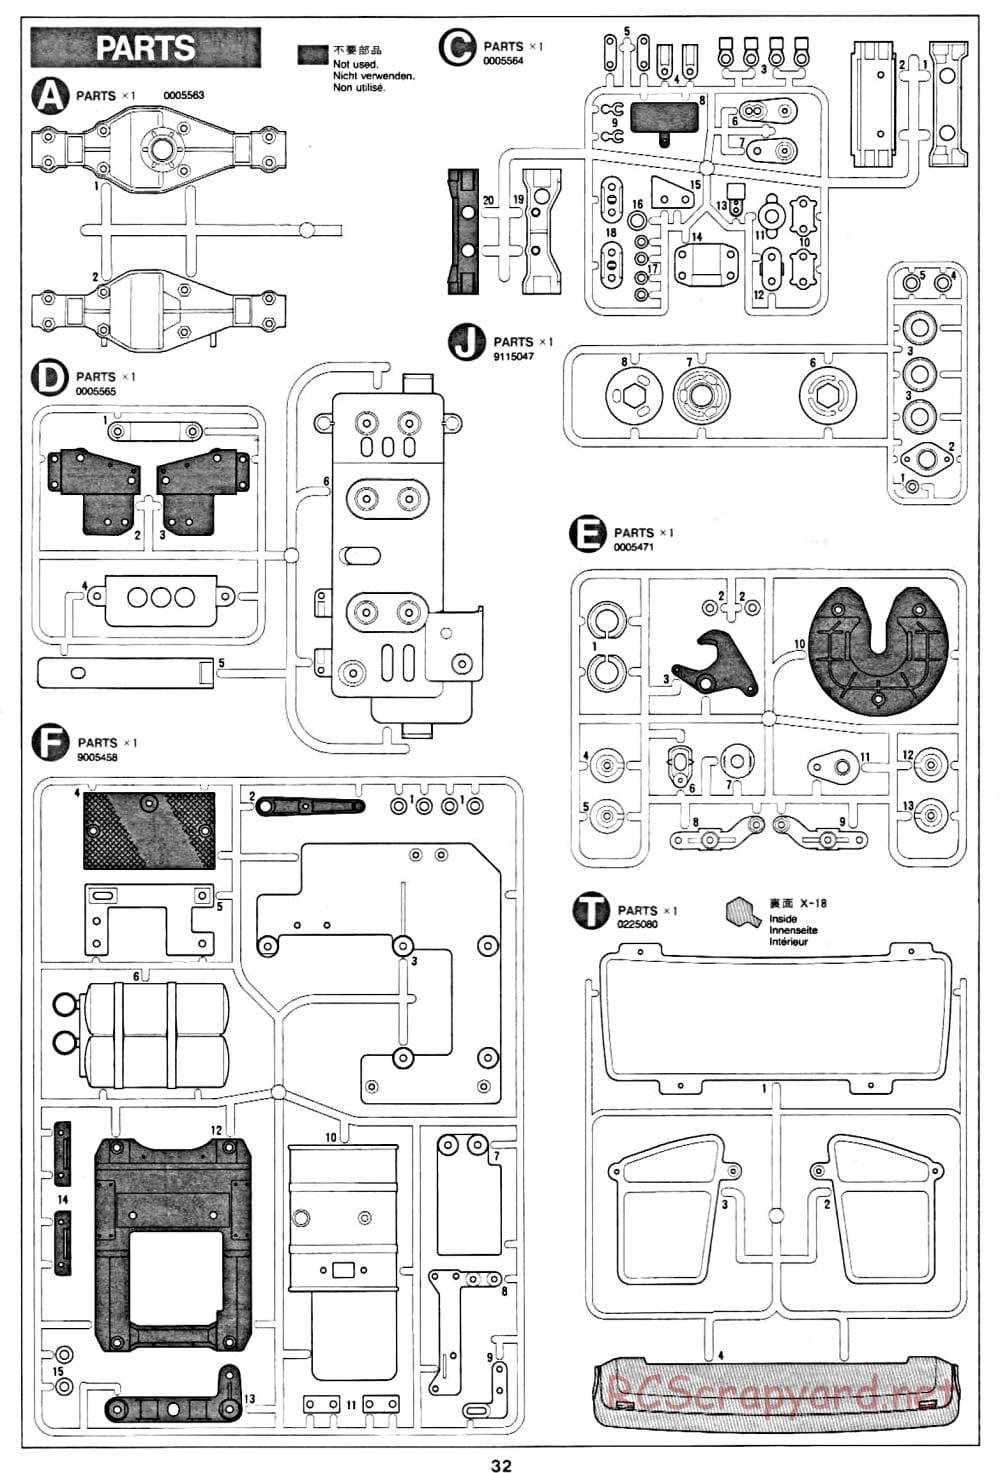 Tamiya - Mercedes-Benz 1850L Delivery Truck - Manual - Page 32